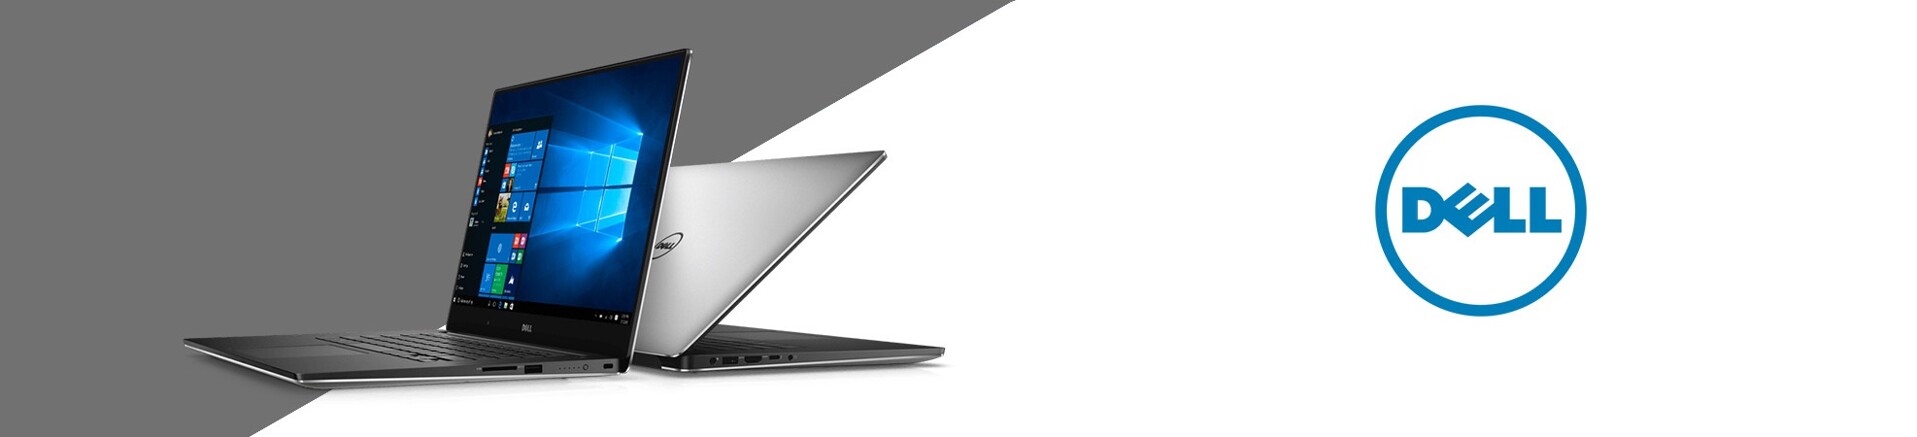 dell notebook banner ITzoo